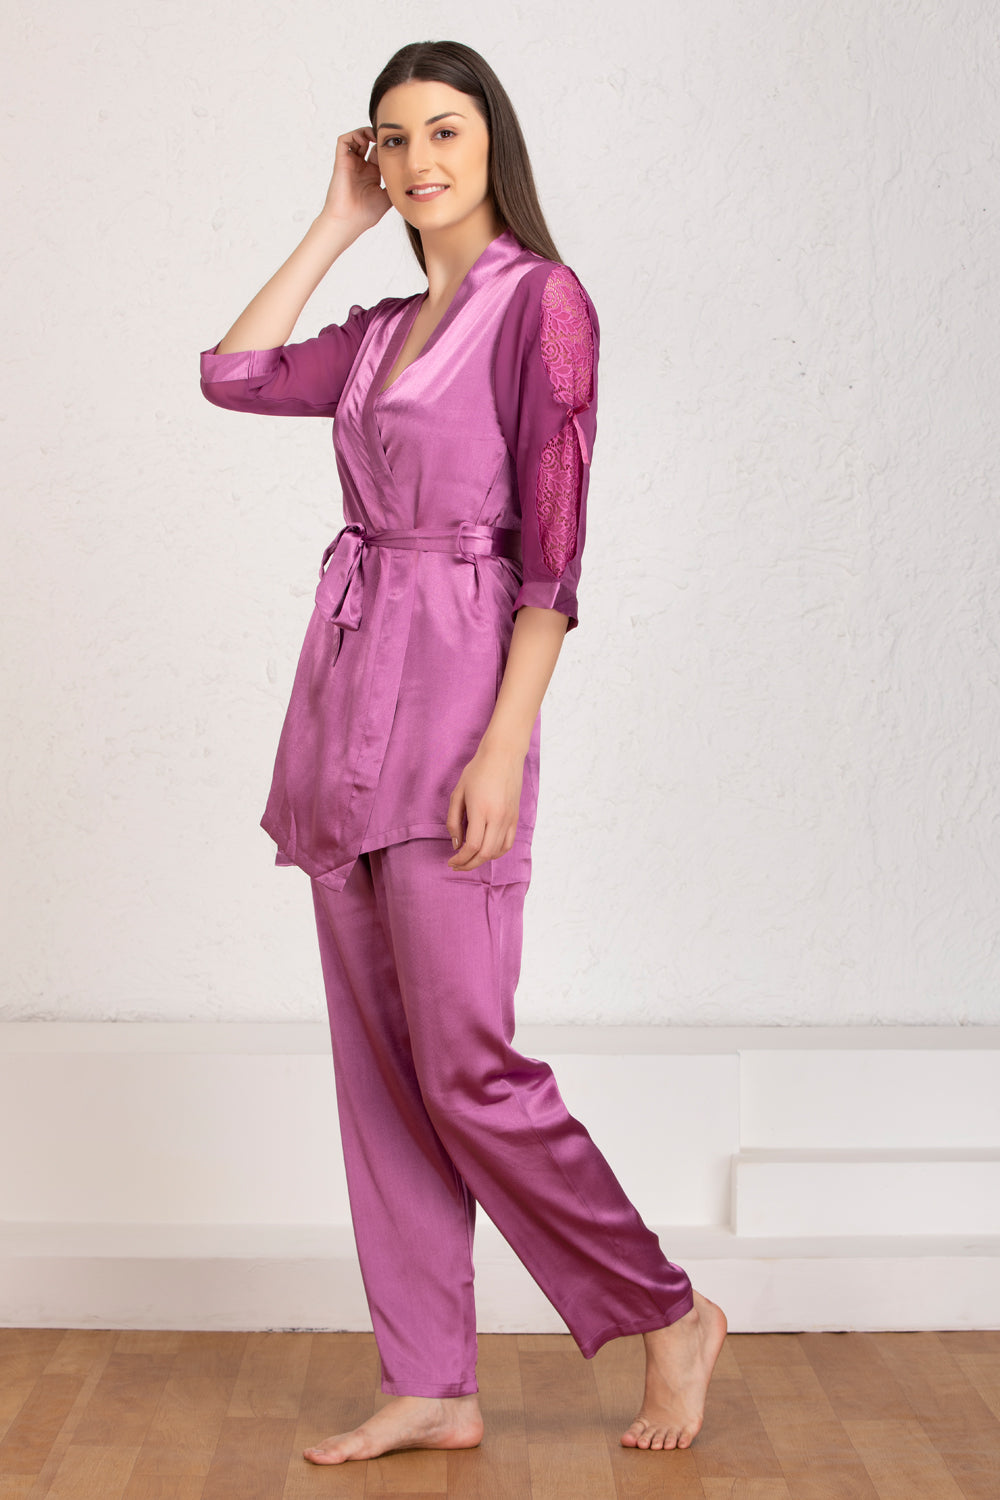 Plain satin Night suit with robe Private Lives